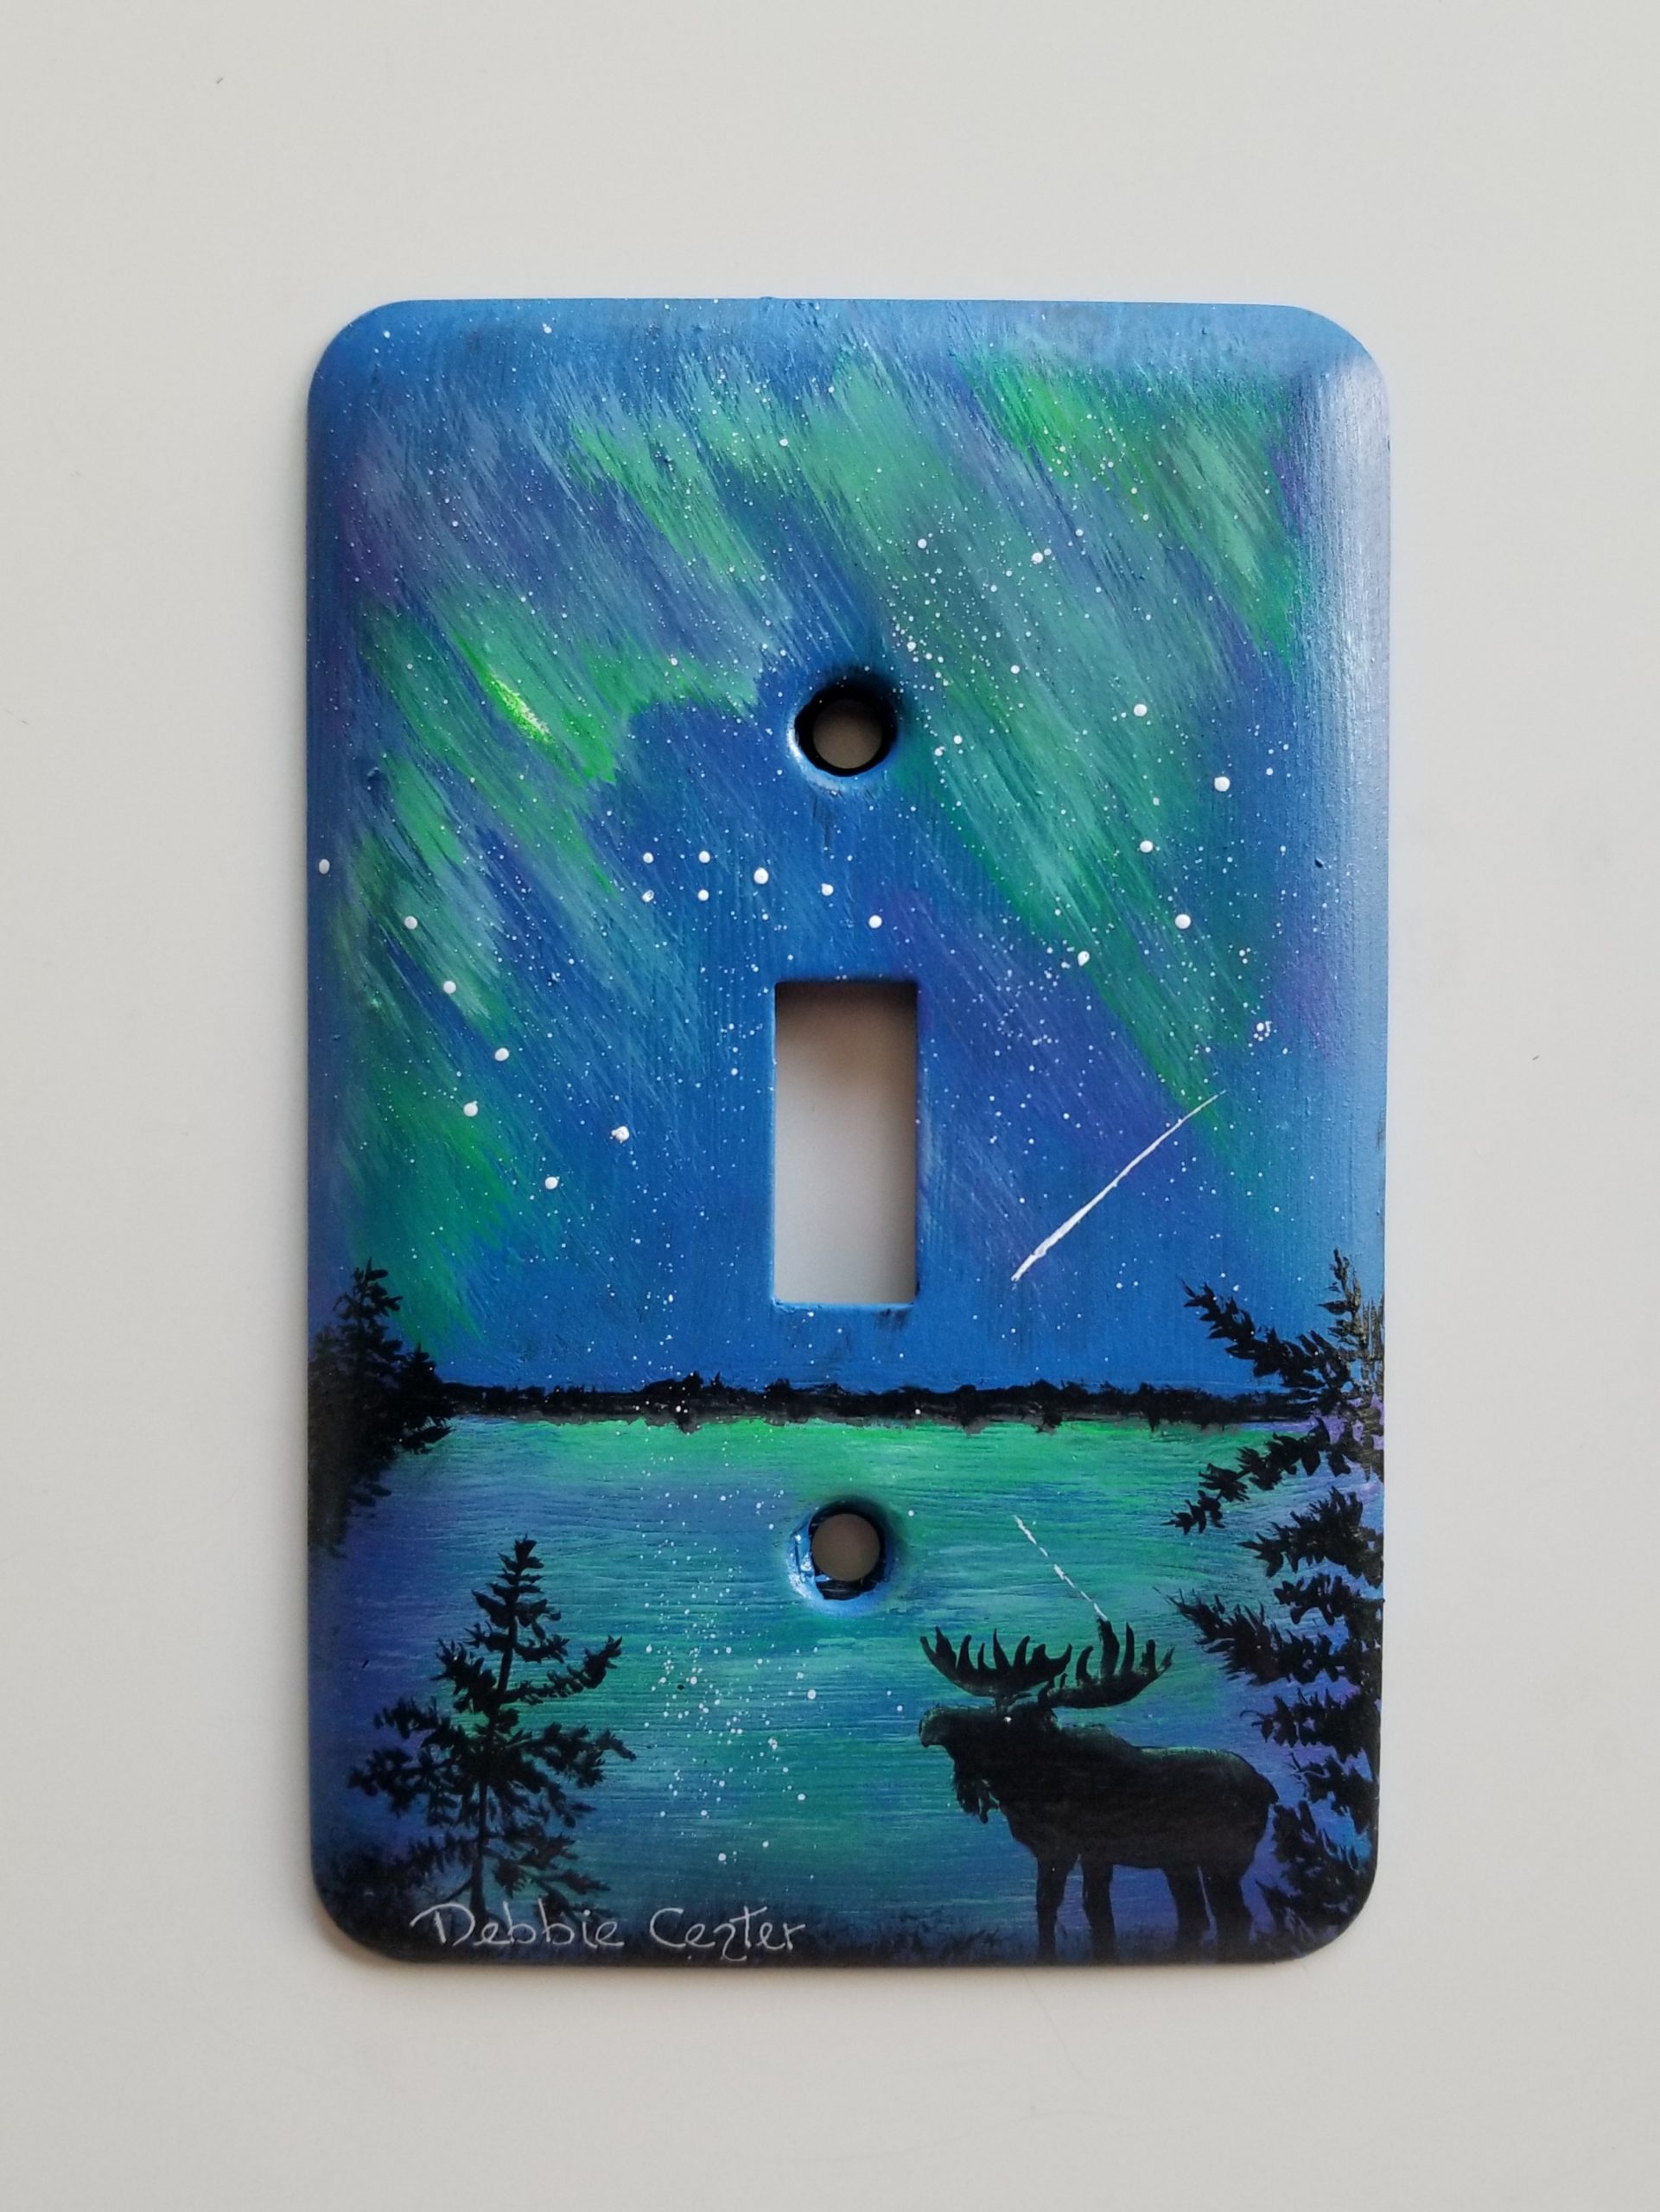 Light Switch Covers, Custom Painted to Your Preferences, Starting at $45 (6-8 week lead time)